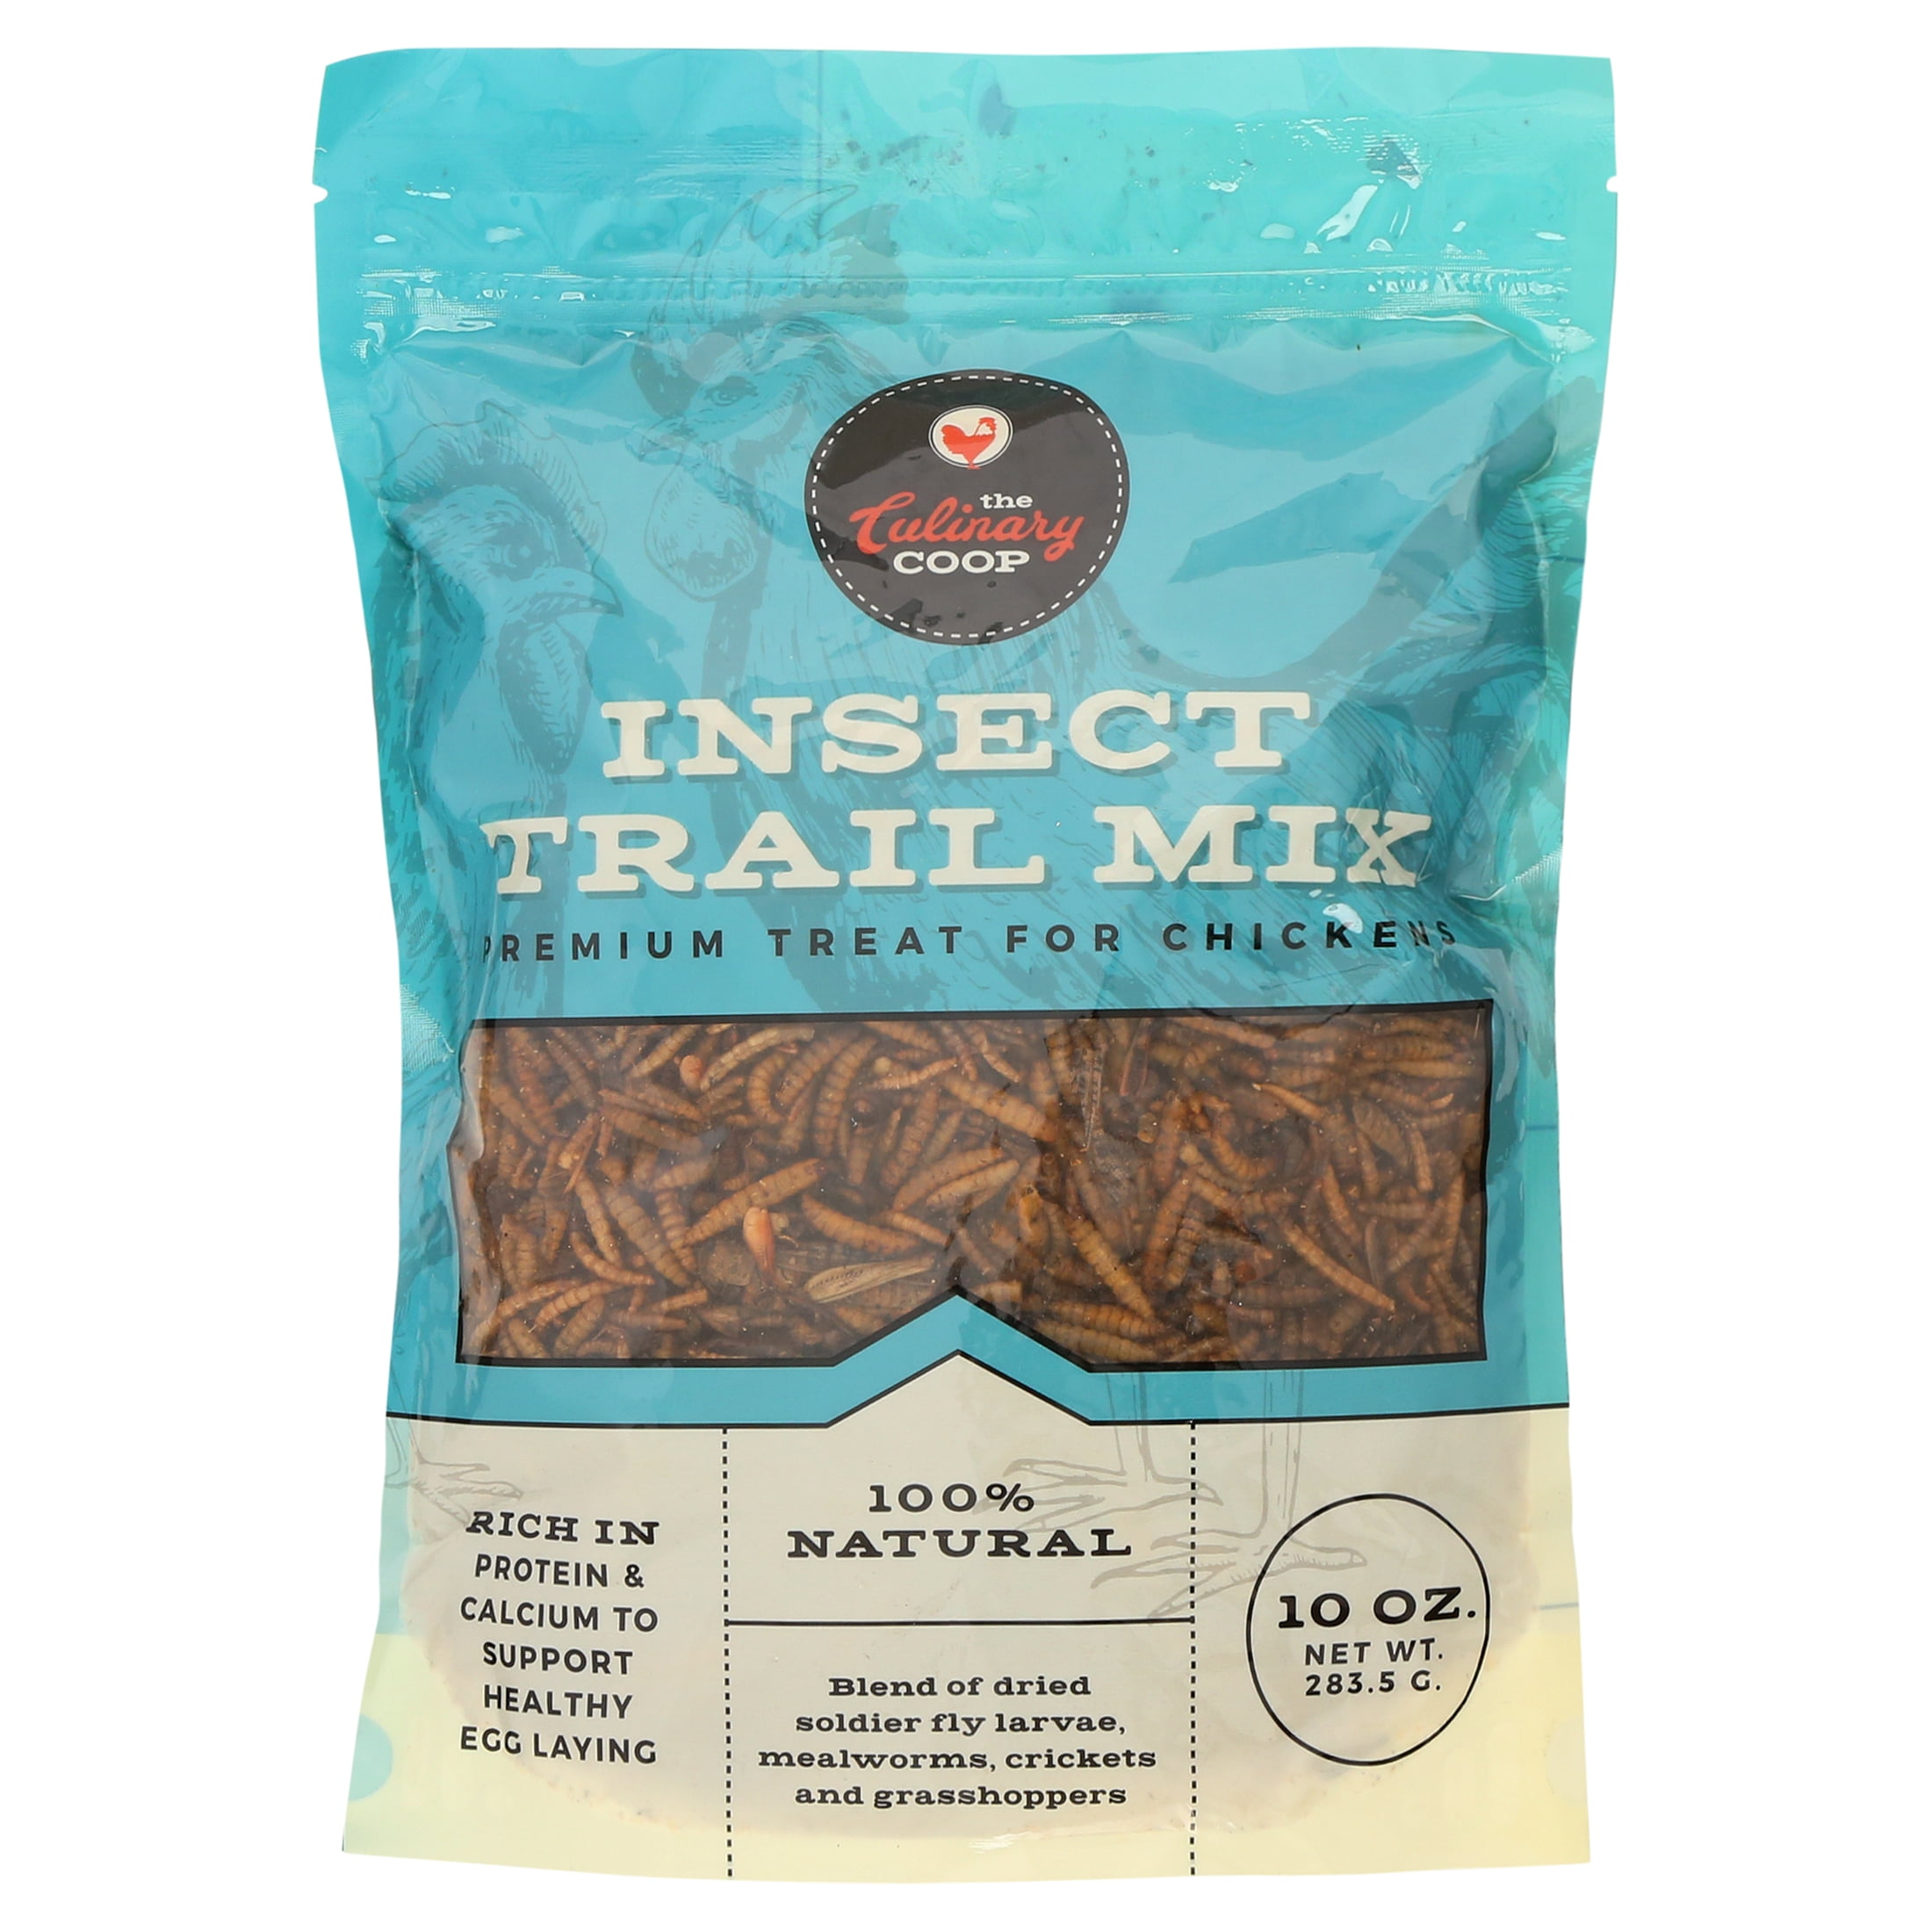 Insect Trail Mix Premium Treat for Chickens 10 oz